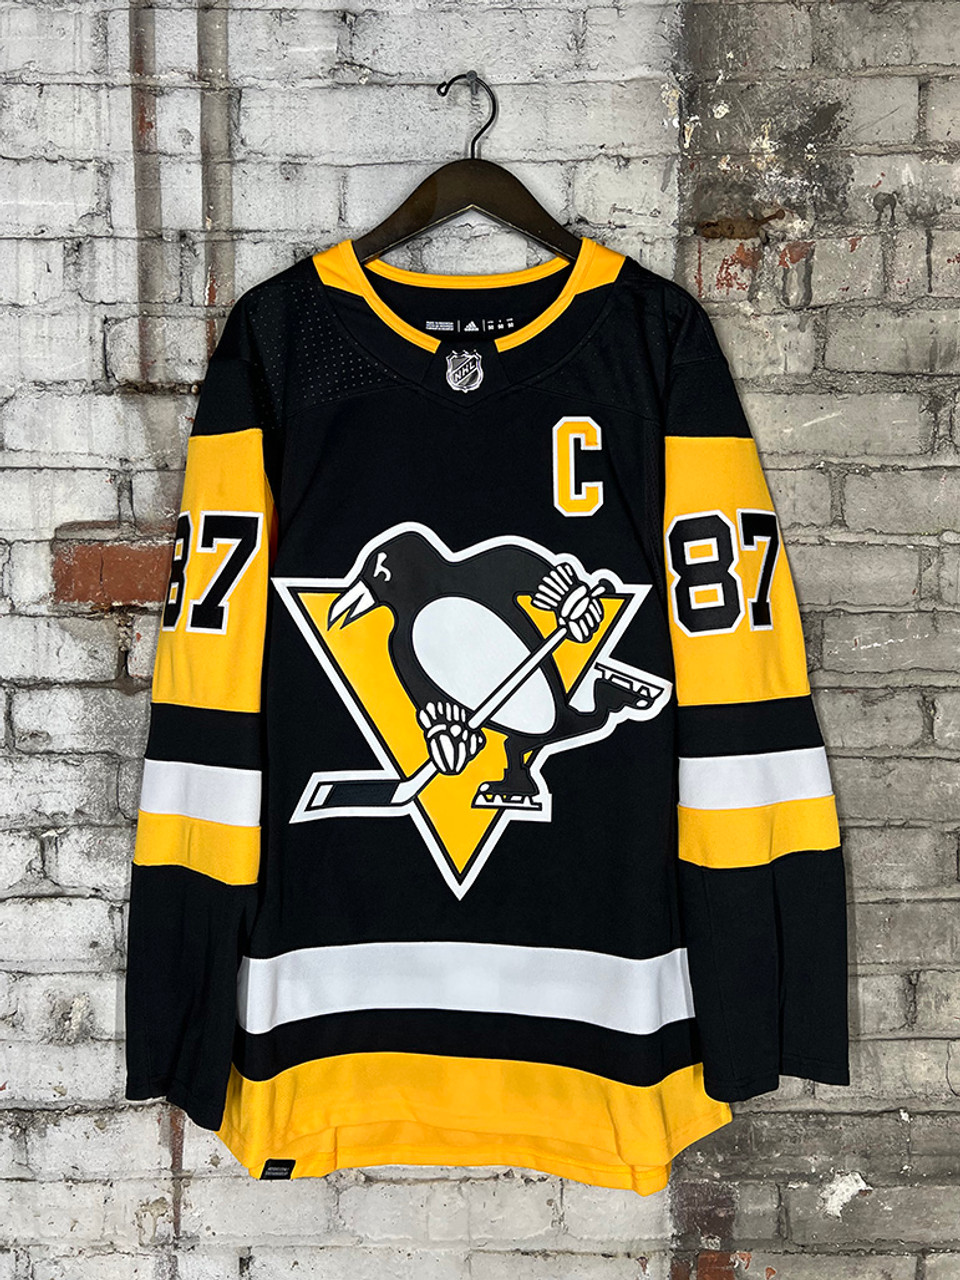 #87 Crosby - Adidas NHL Embroidered Penguins Jersey with Strap